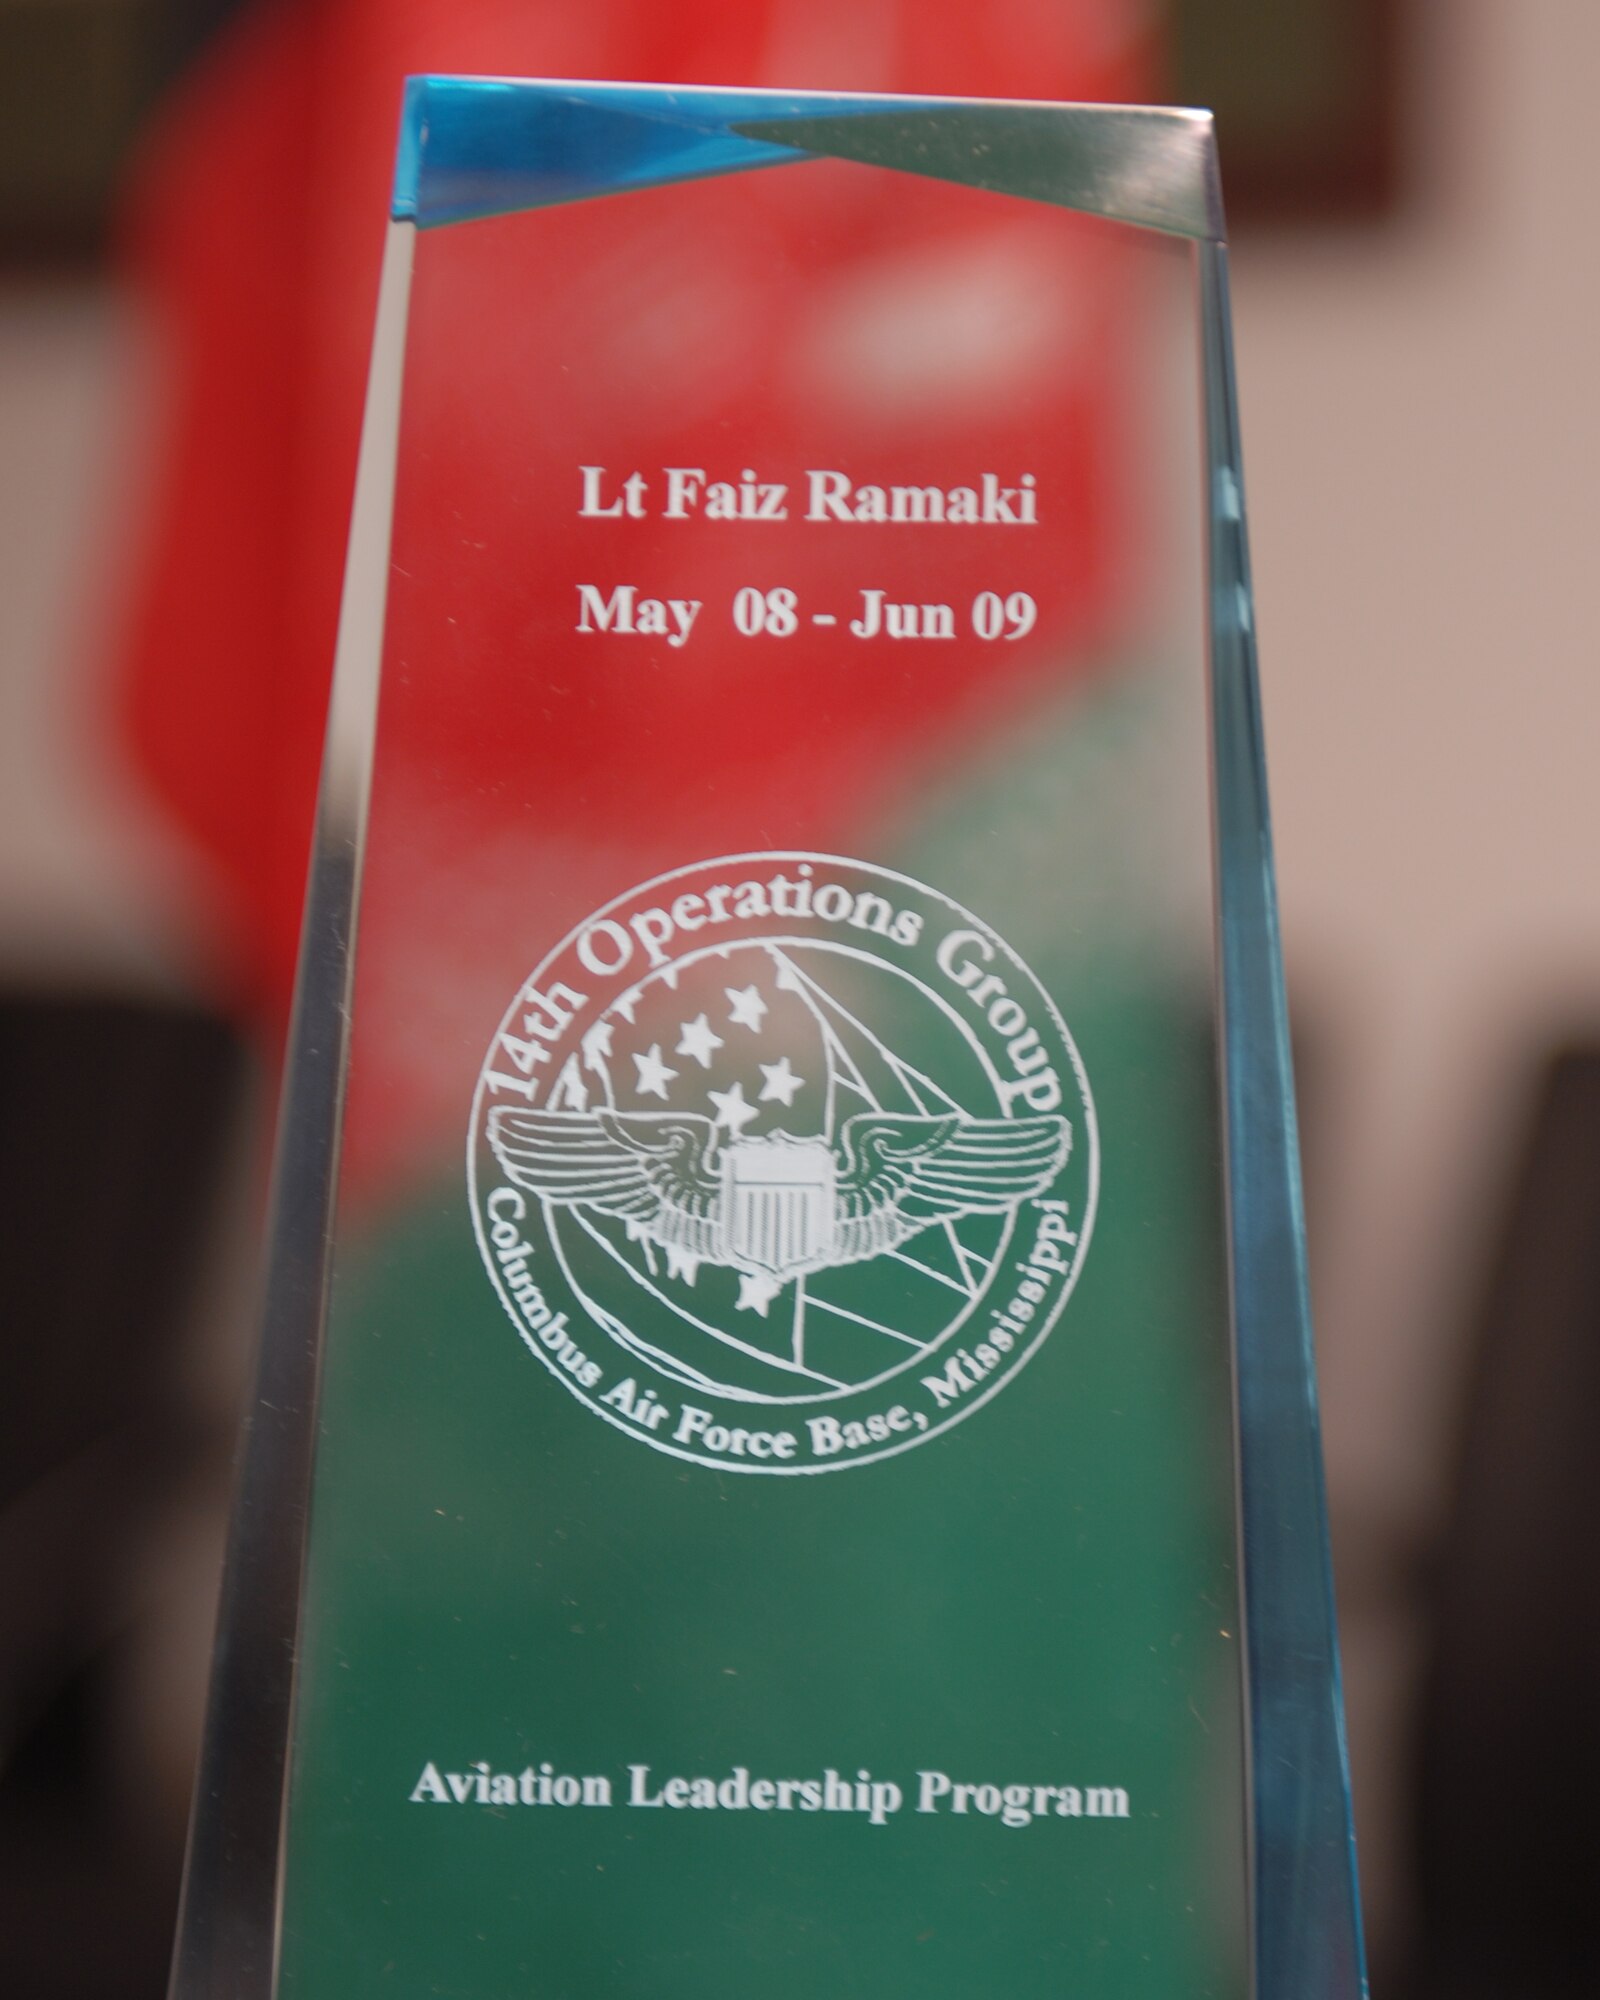 Afghan National Army Air Corps Lt. Faiz Ramaki received this Aviation Leadership award in a special graduation ceremony June 12.  The Aviation Leadership Program is a Secretary of the Air Force initiative to build foreign relations with other air forces. (US Air Force Photo/Melissa Duncan)